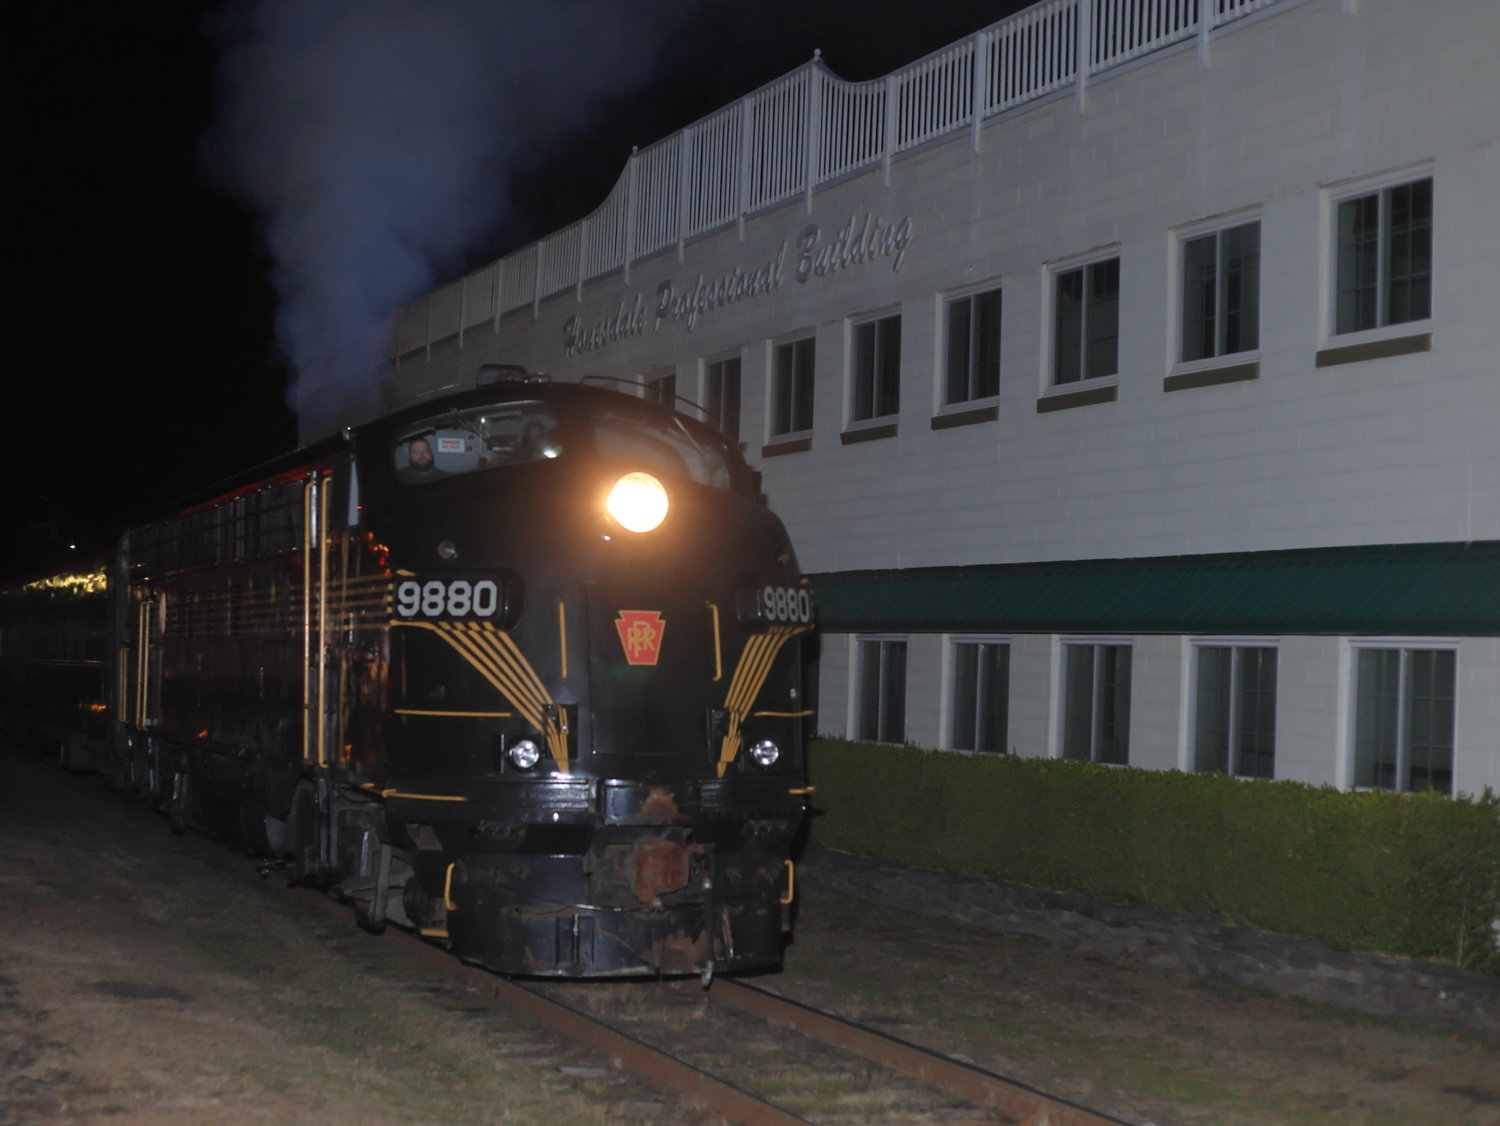 The Stourbridge Line was running its holiday excursion train, which briefly held up the rear of the parade. As I was close to the tracks and using flash, I was able to catch the engine...